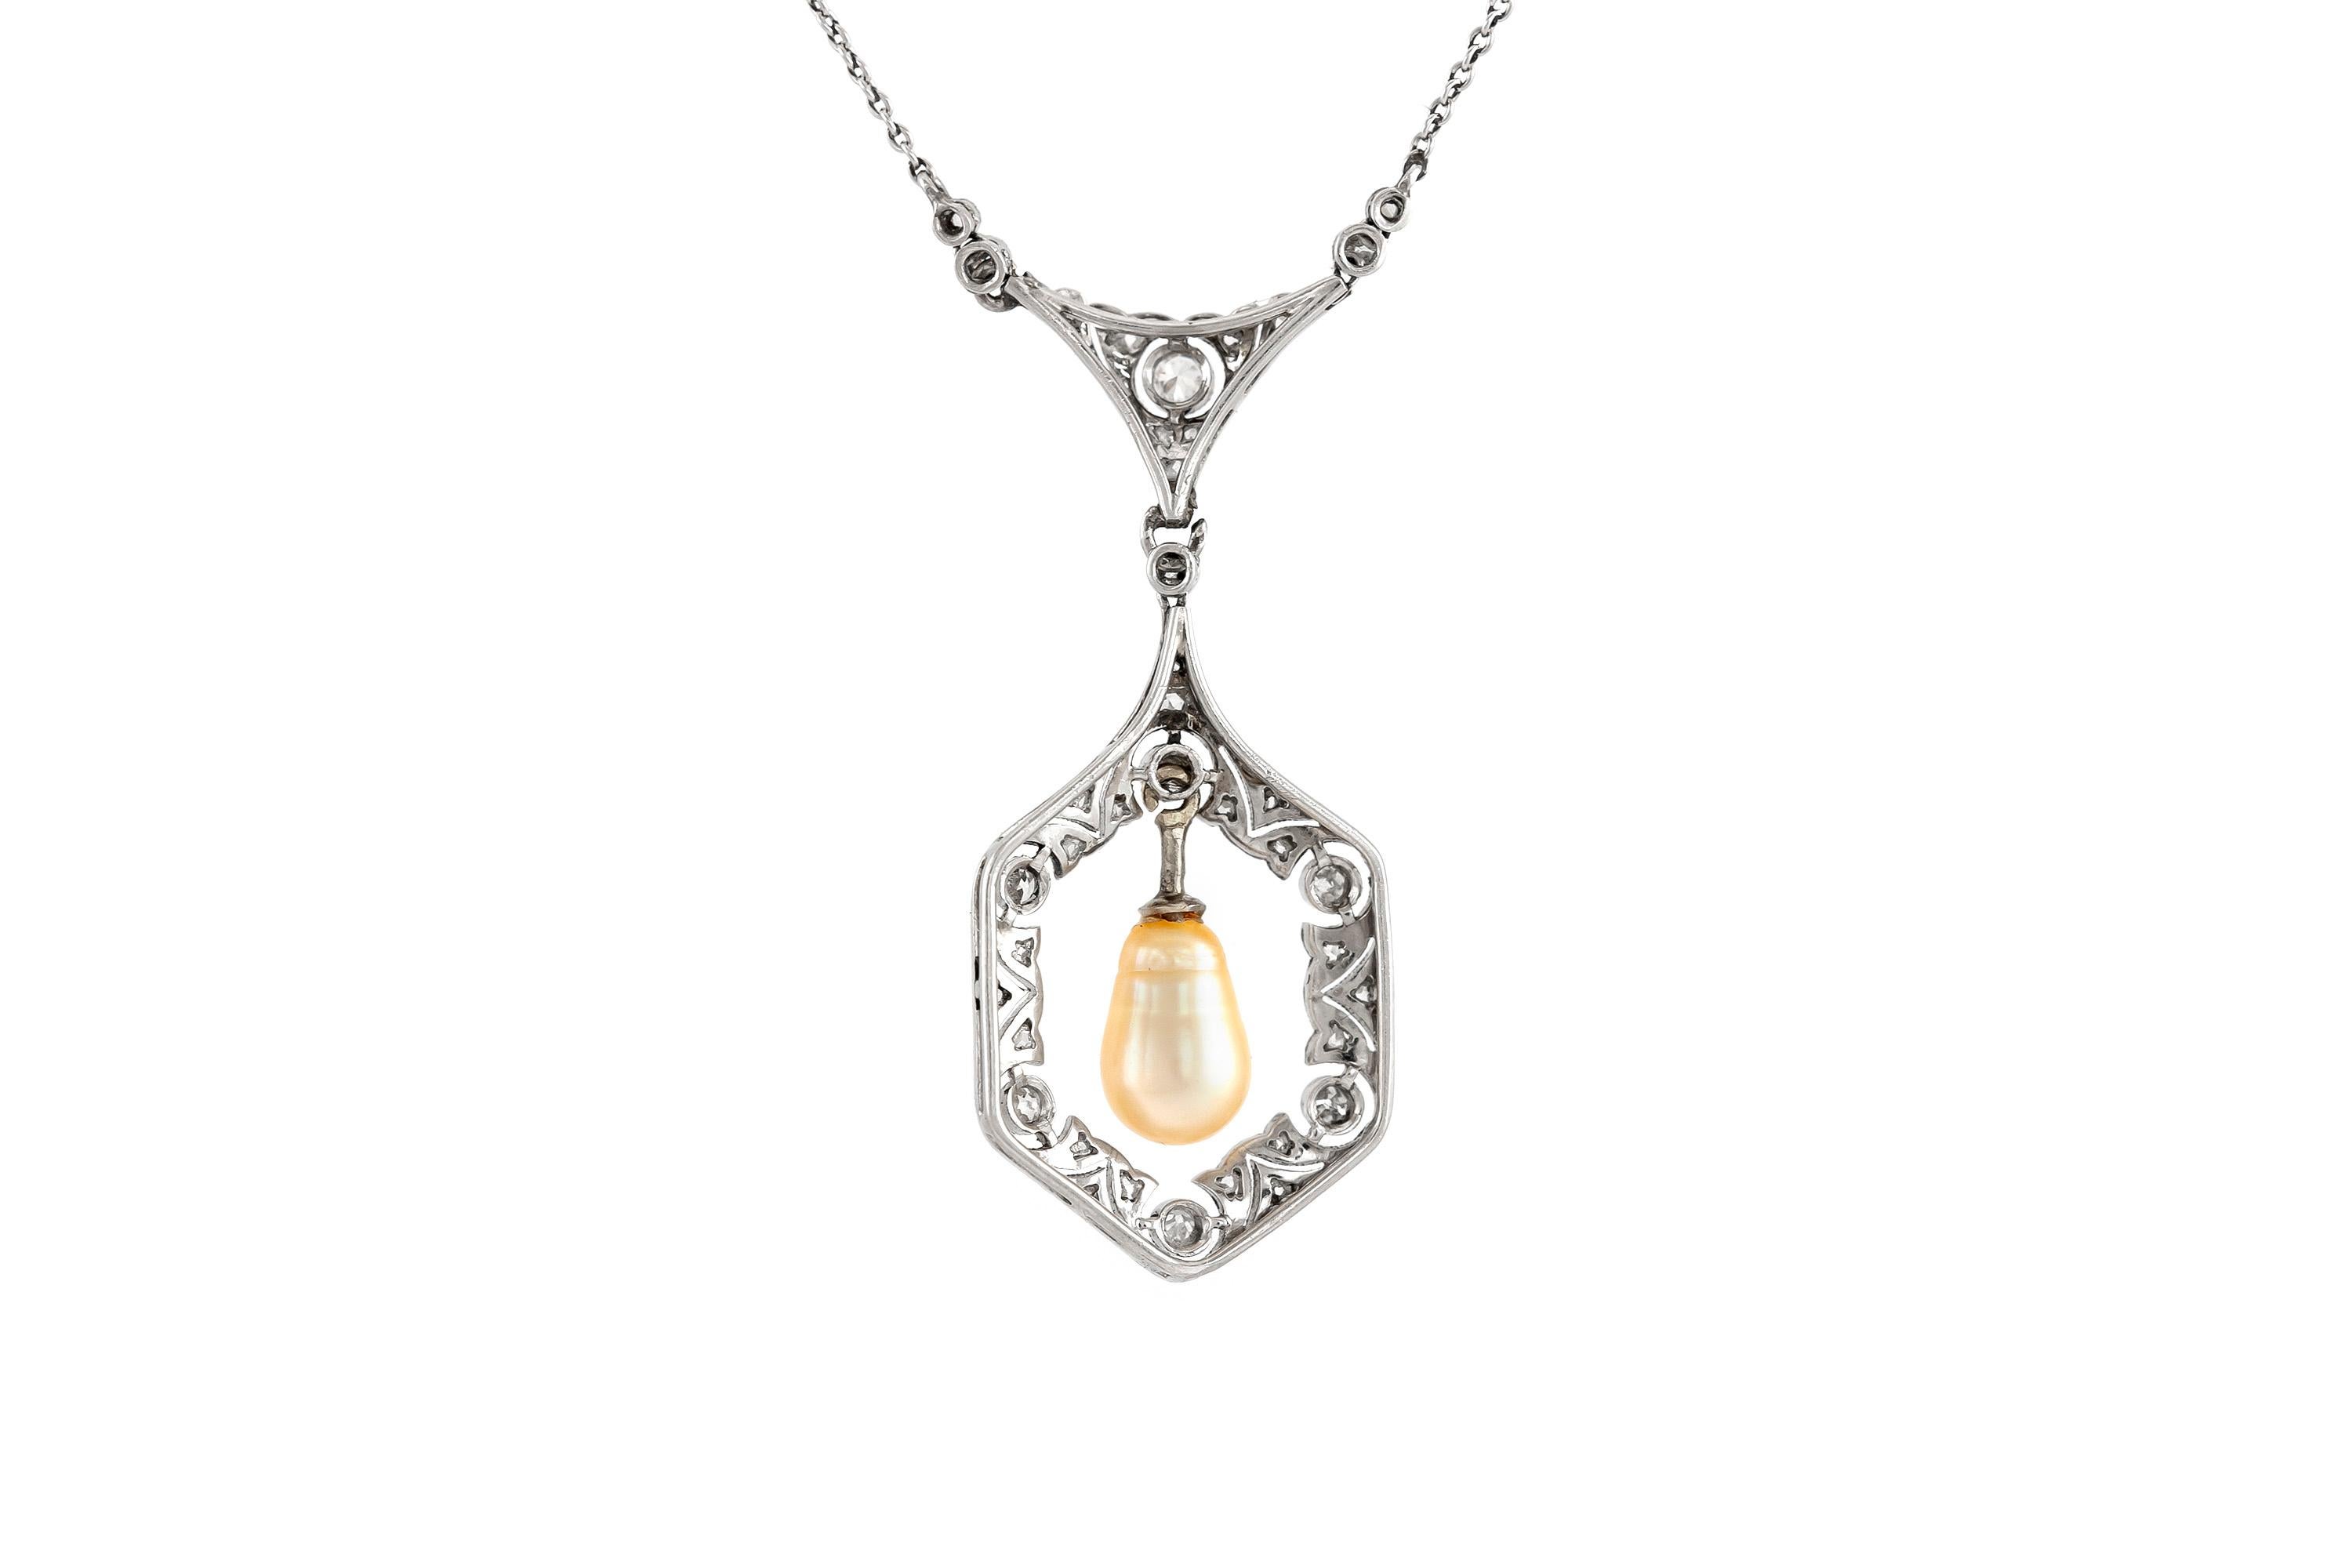 The necklace is finely crafted in platinum, with a natural pearl and diamonds weighing a total of 0.80 dwt. Circa 1920.